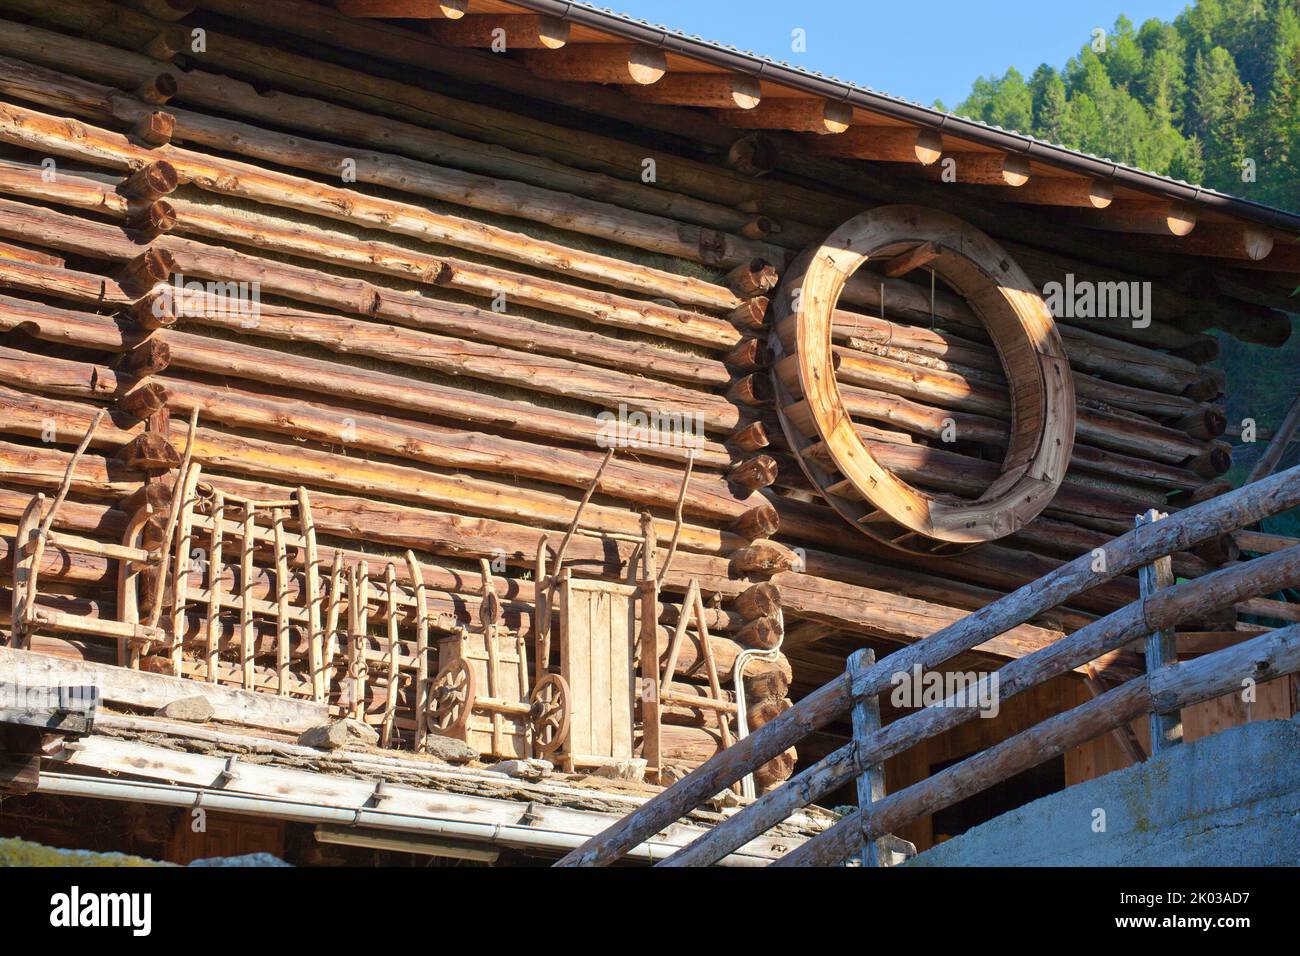 agricultural equipment made of wood as a souvenir on the stable wall from the mountain farm in the South Tyrolean Ulten Valley Stock Photo